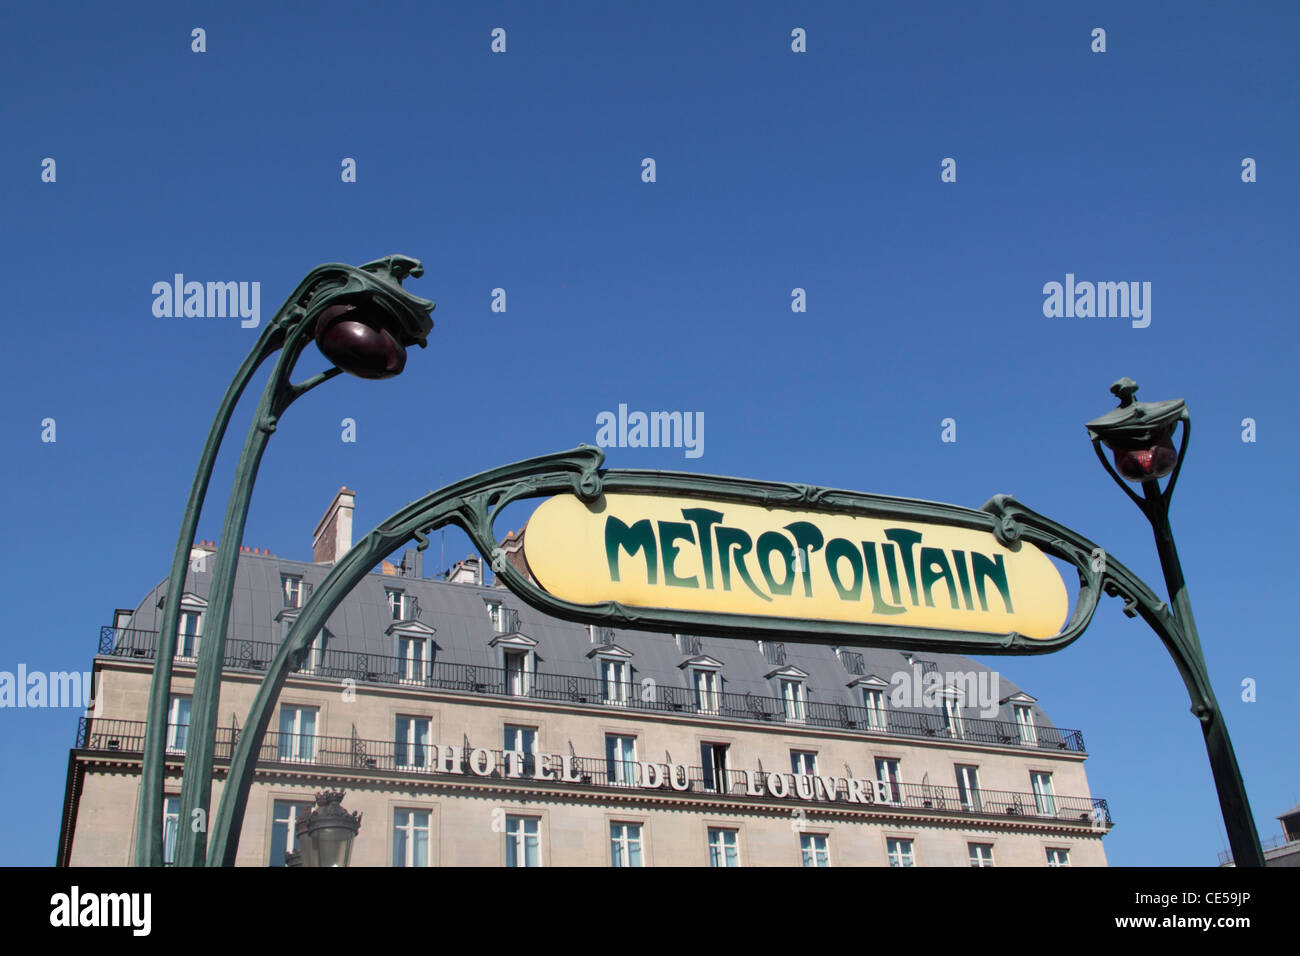 Sign of Metro station near Louvre museum and view of the Hotel du Louvre, Paris, France Stock Photo